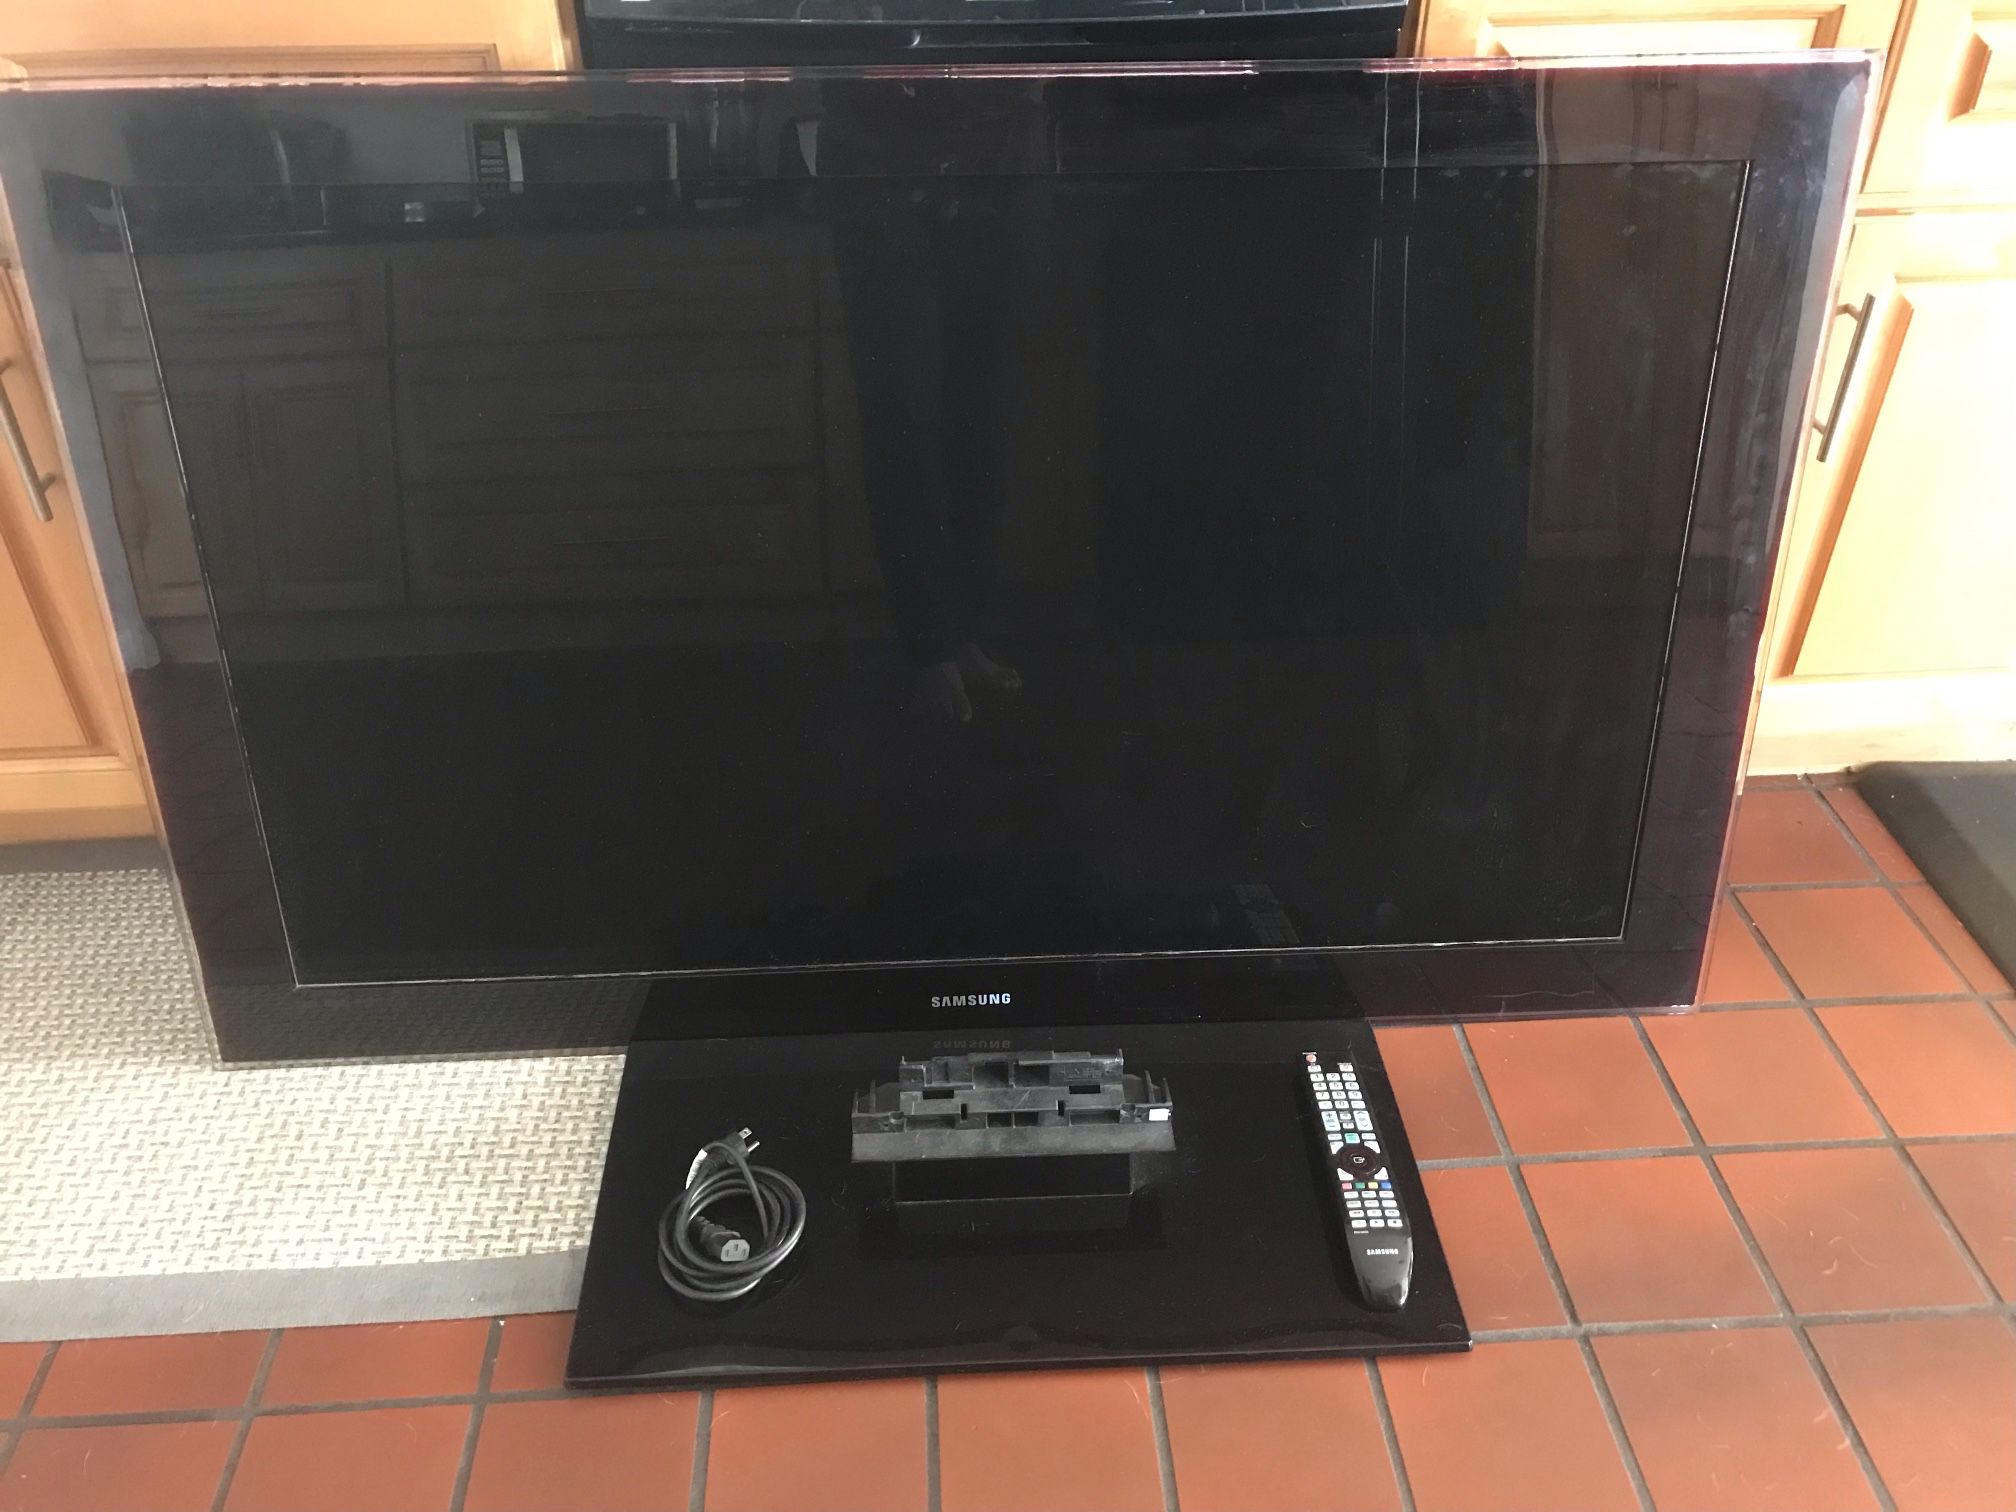 Free Samsung 7 Series 52" LCD TV - DOES NOT TURN ON